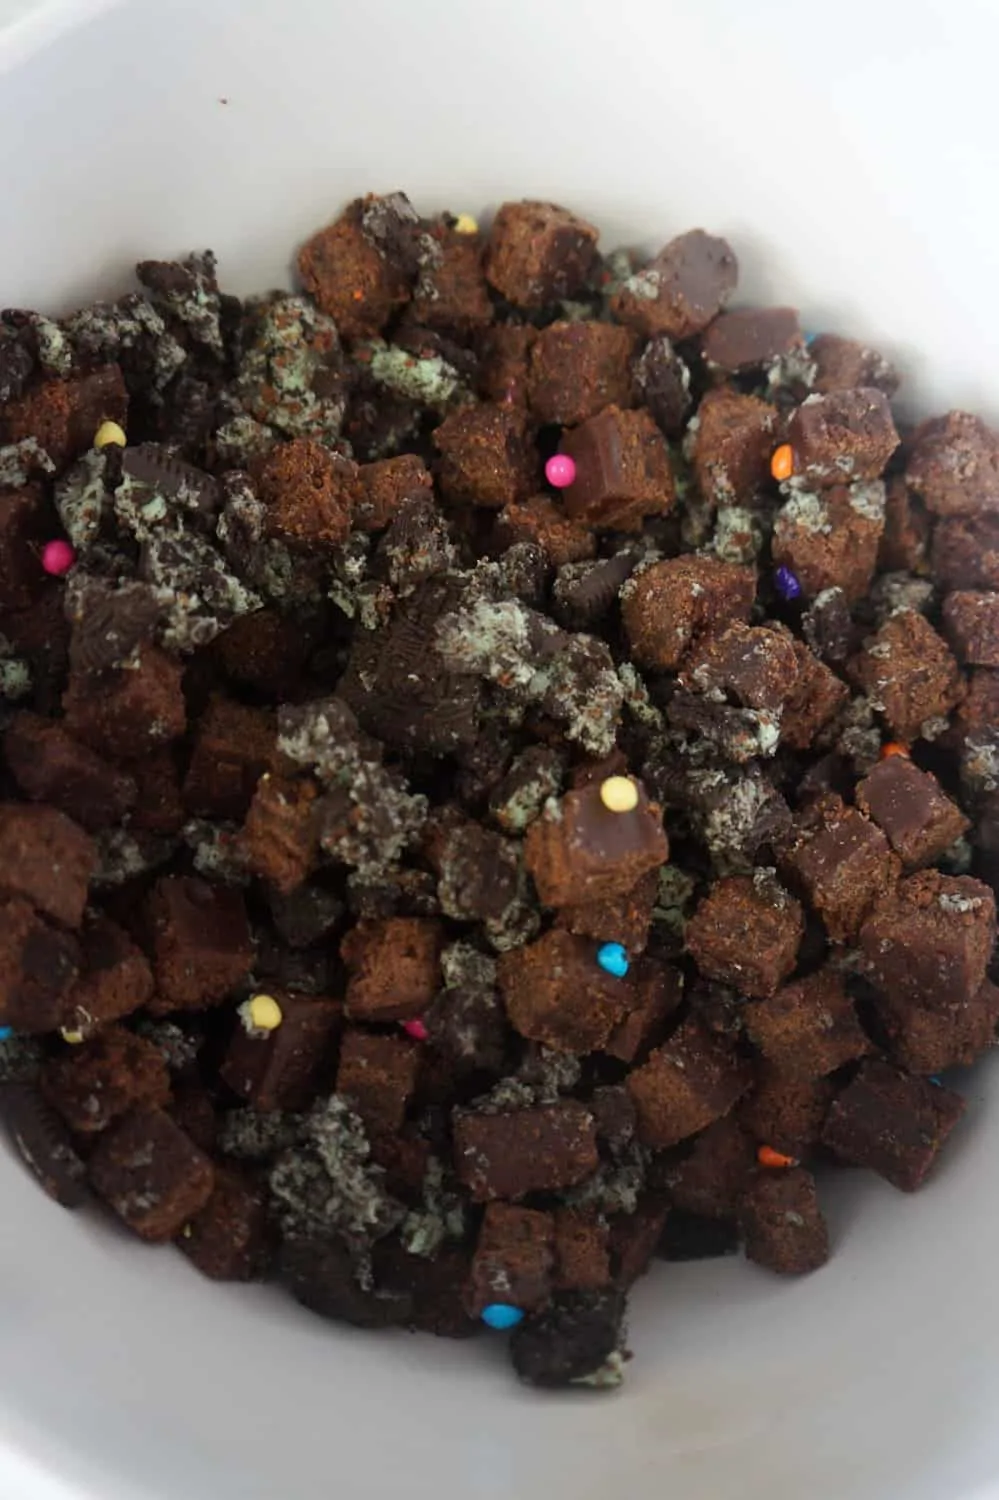 crushed mint Oreos and chopped Cosmic brownies